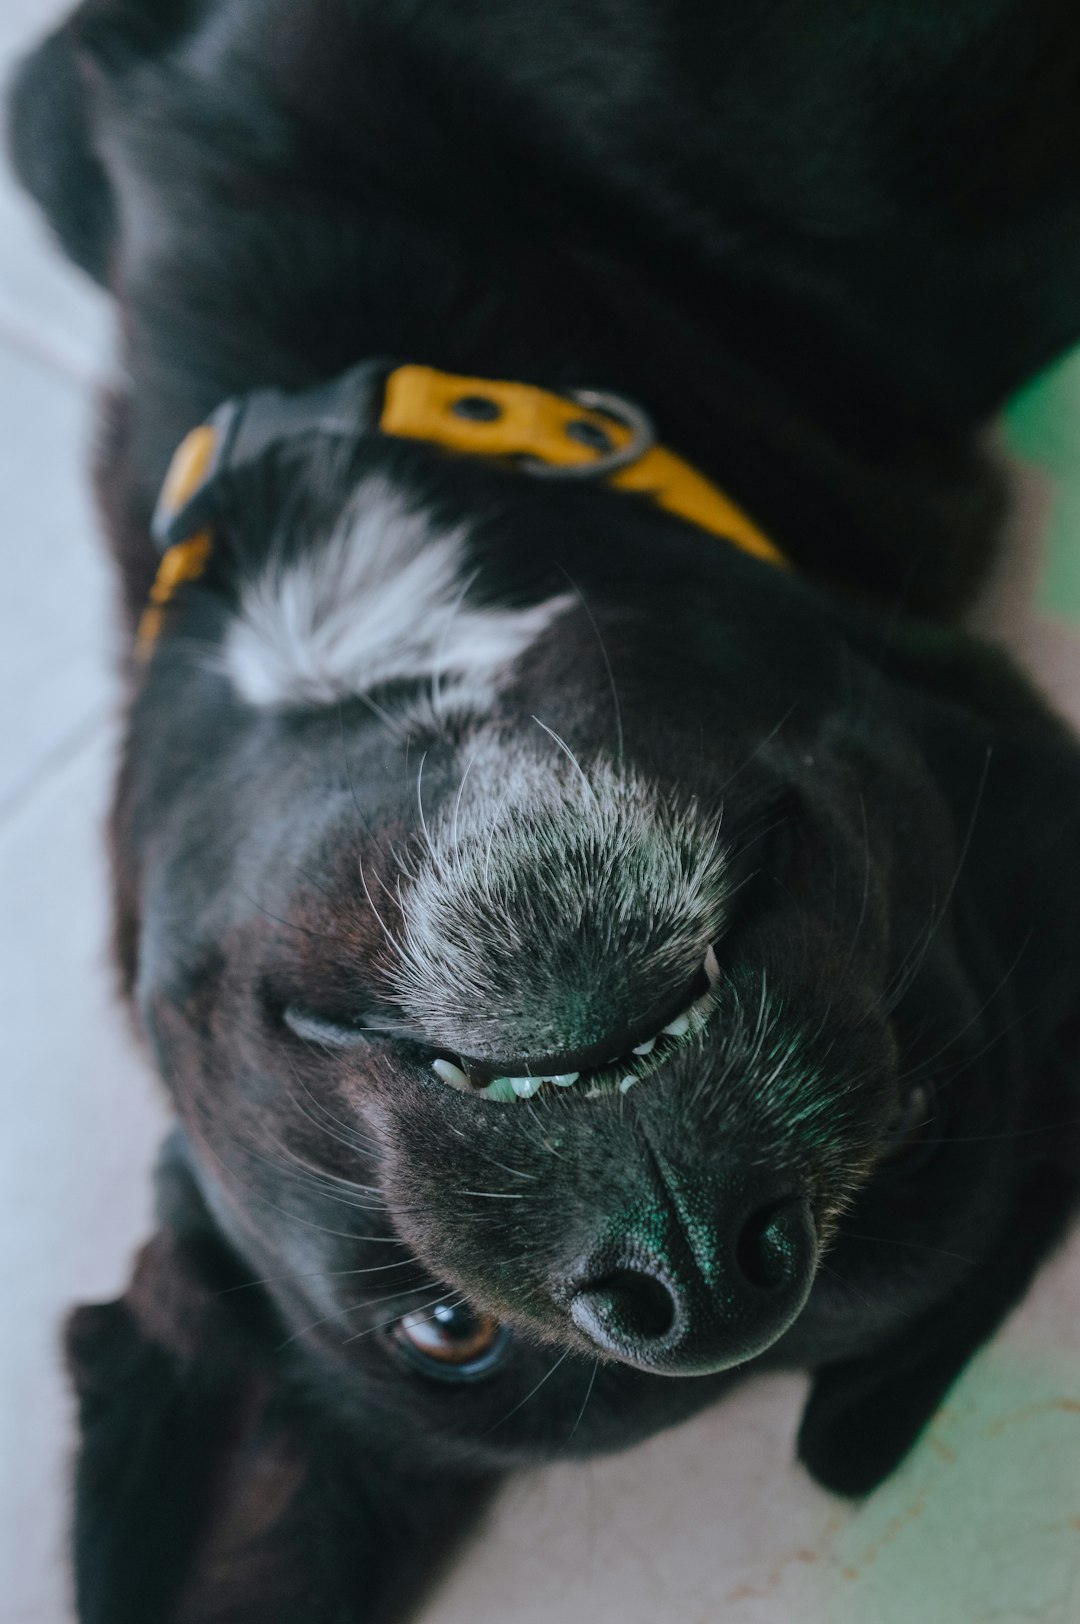 black short coated puppy with yellow and black collar